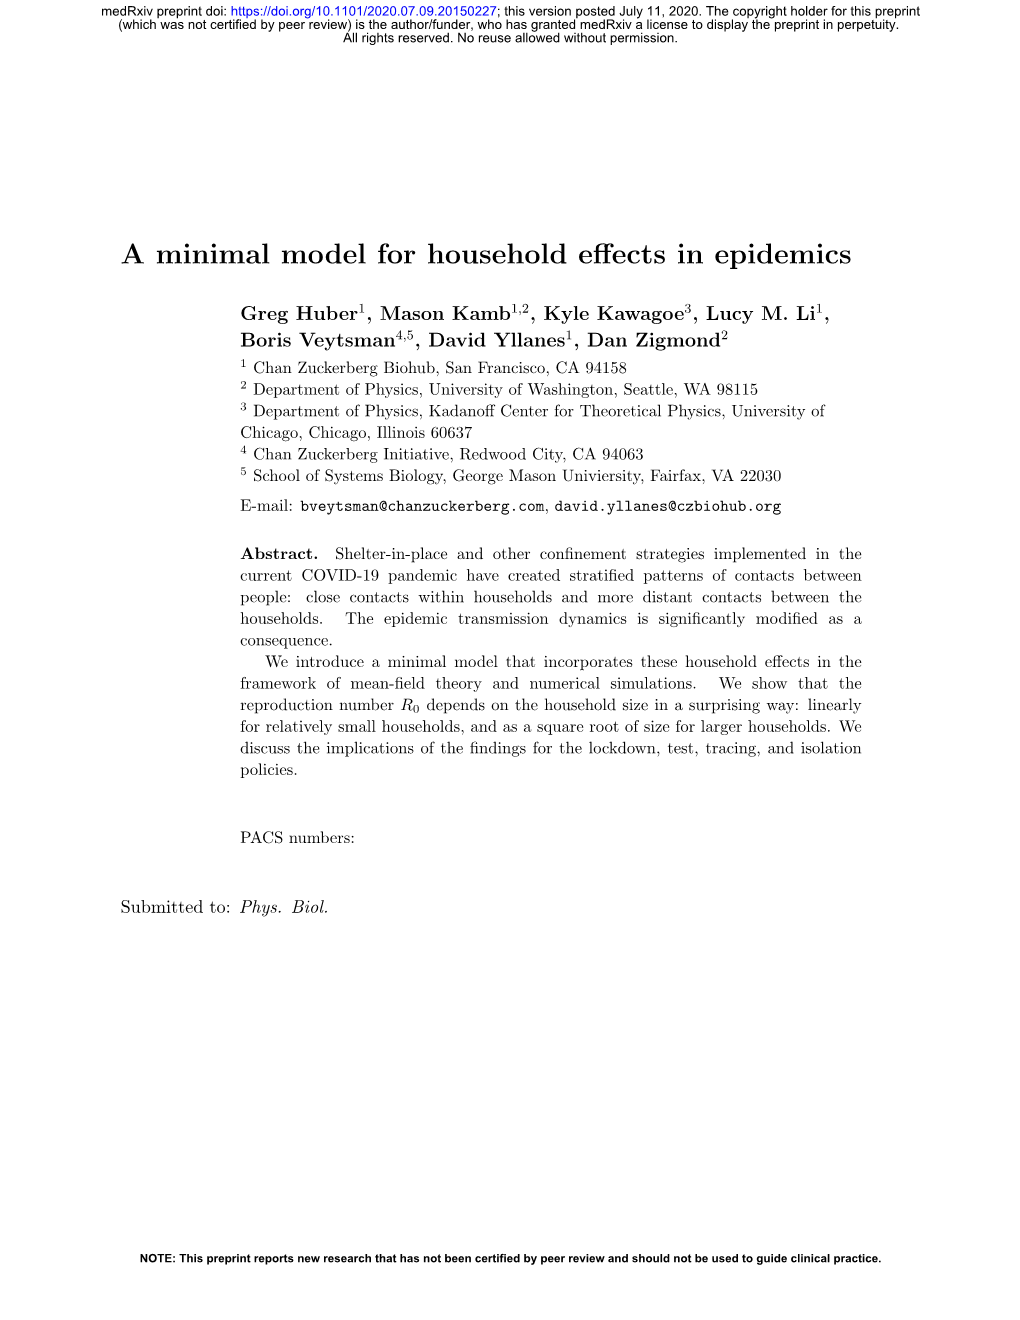 A Minimal Model for Household Effects in Epidemics